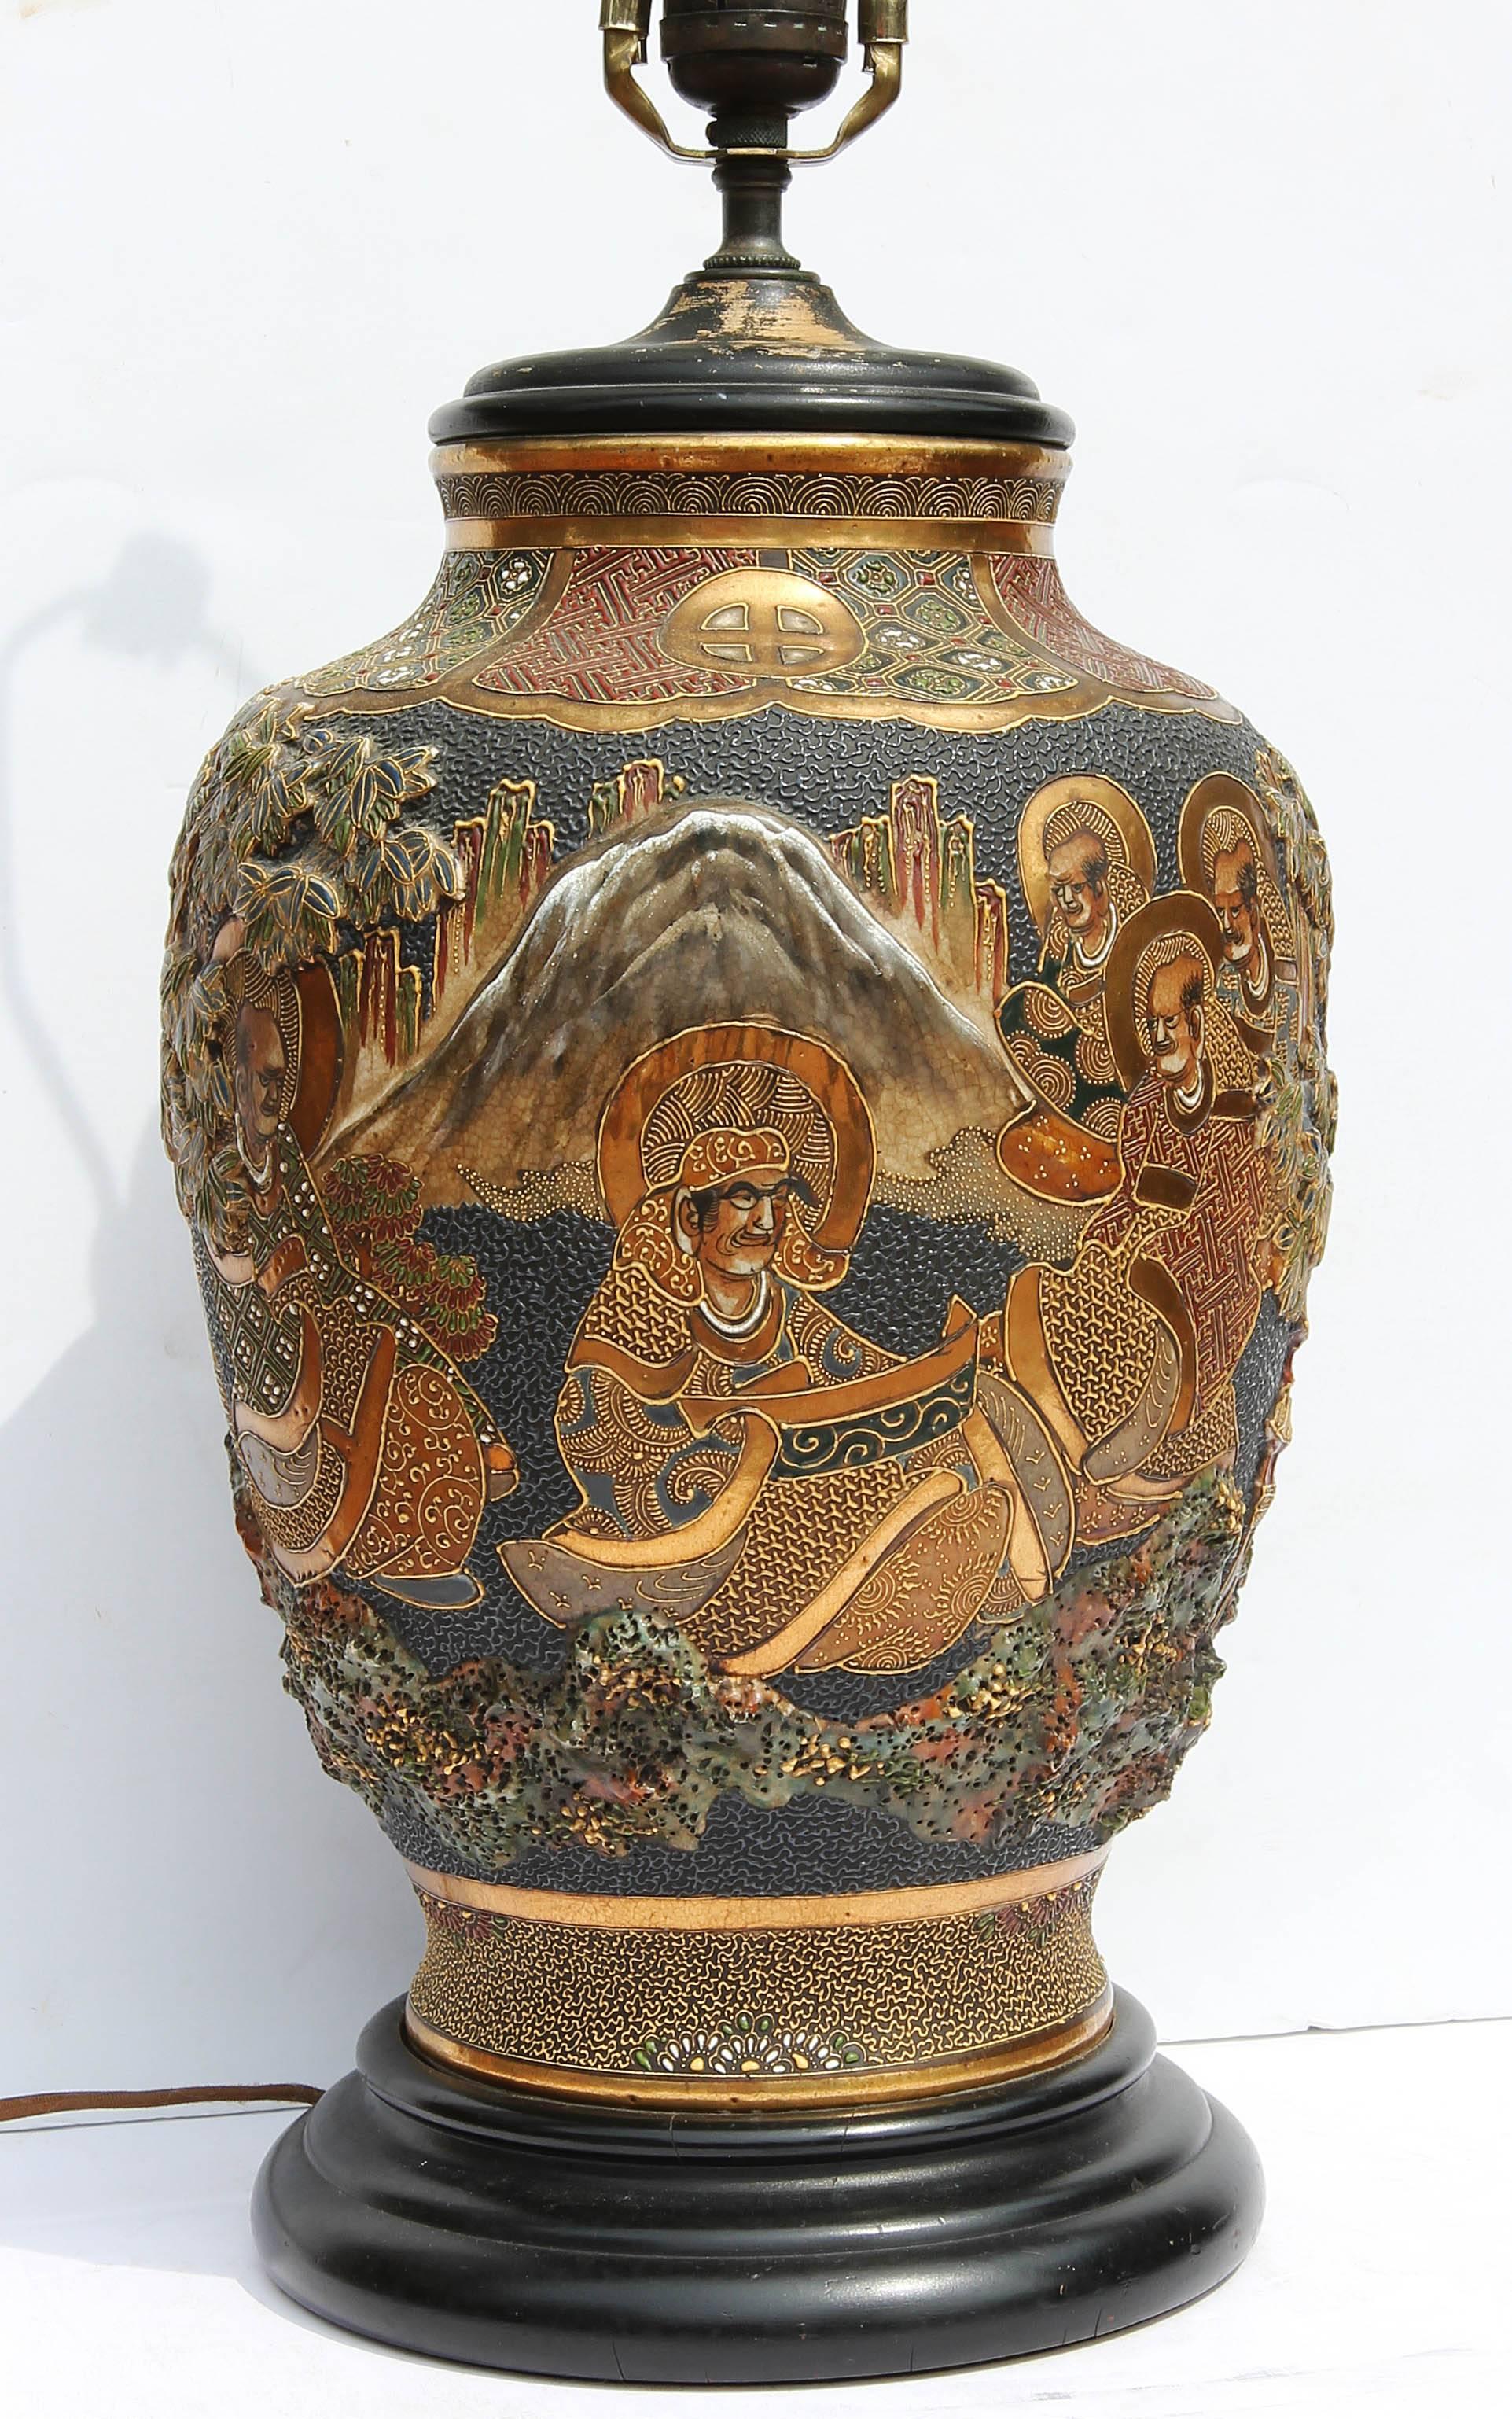 Antique Japanese Satsuma lamp. Gilt and glazed decoration, showing scholars in a landscape. Exceptional quality and depth, circa 1920.